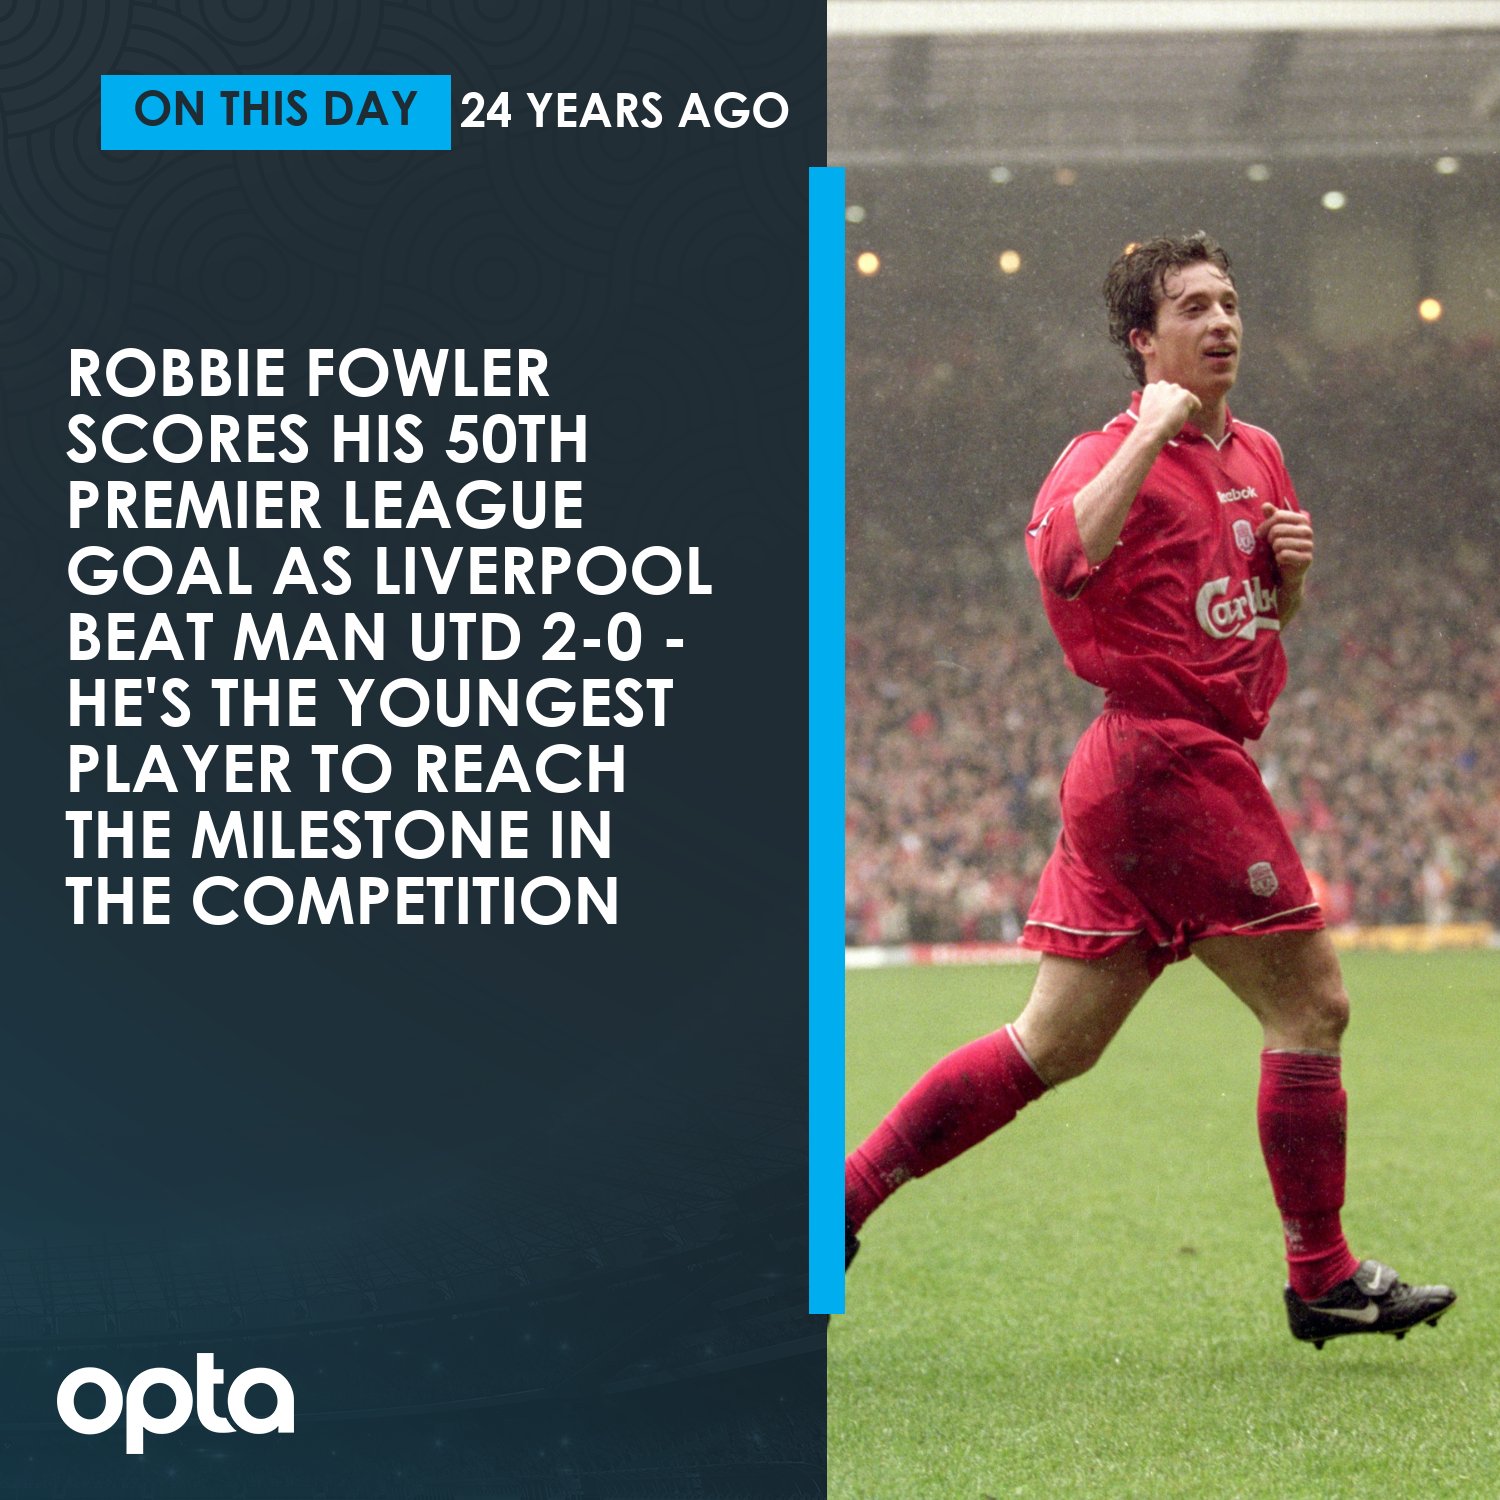 Optajoe On Twitter 17 12 On This Day In 1995 Robbie Fowler Scored His 50th Premier League Goal As Liverpool Beat Man Utd 2 0 He S The Youngest Player To Reach The Milestone